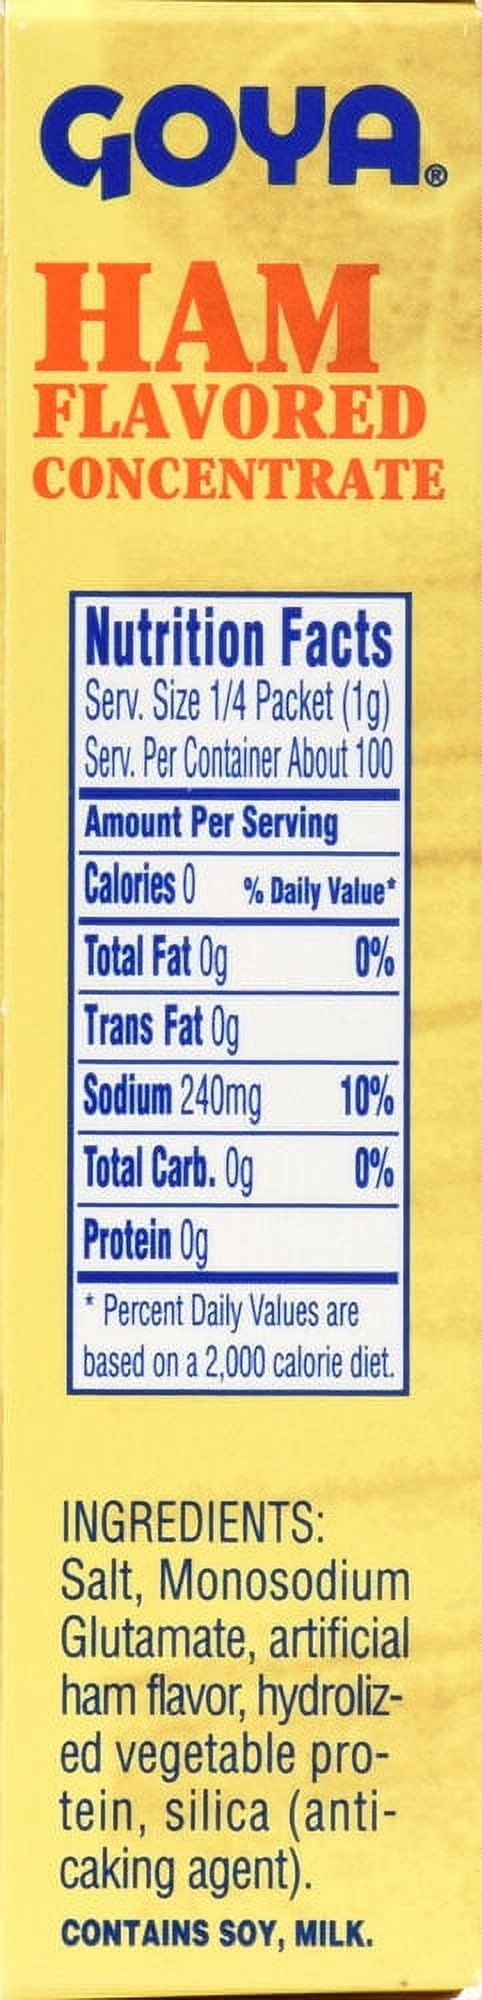 Ham Flavored Seasoning/Concentrate Reduced Sodium 3 pack (for a total of 24  packets)